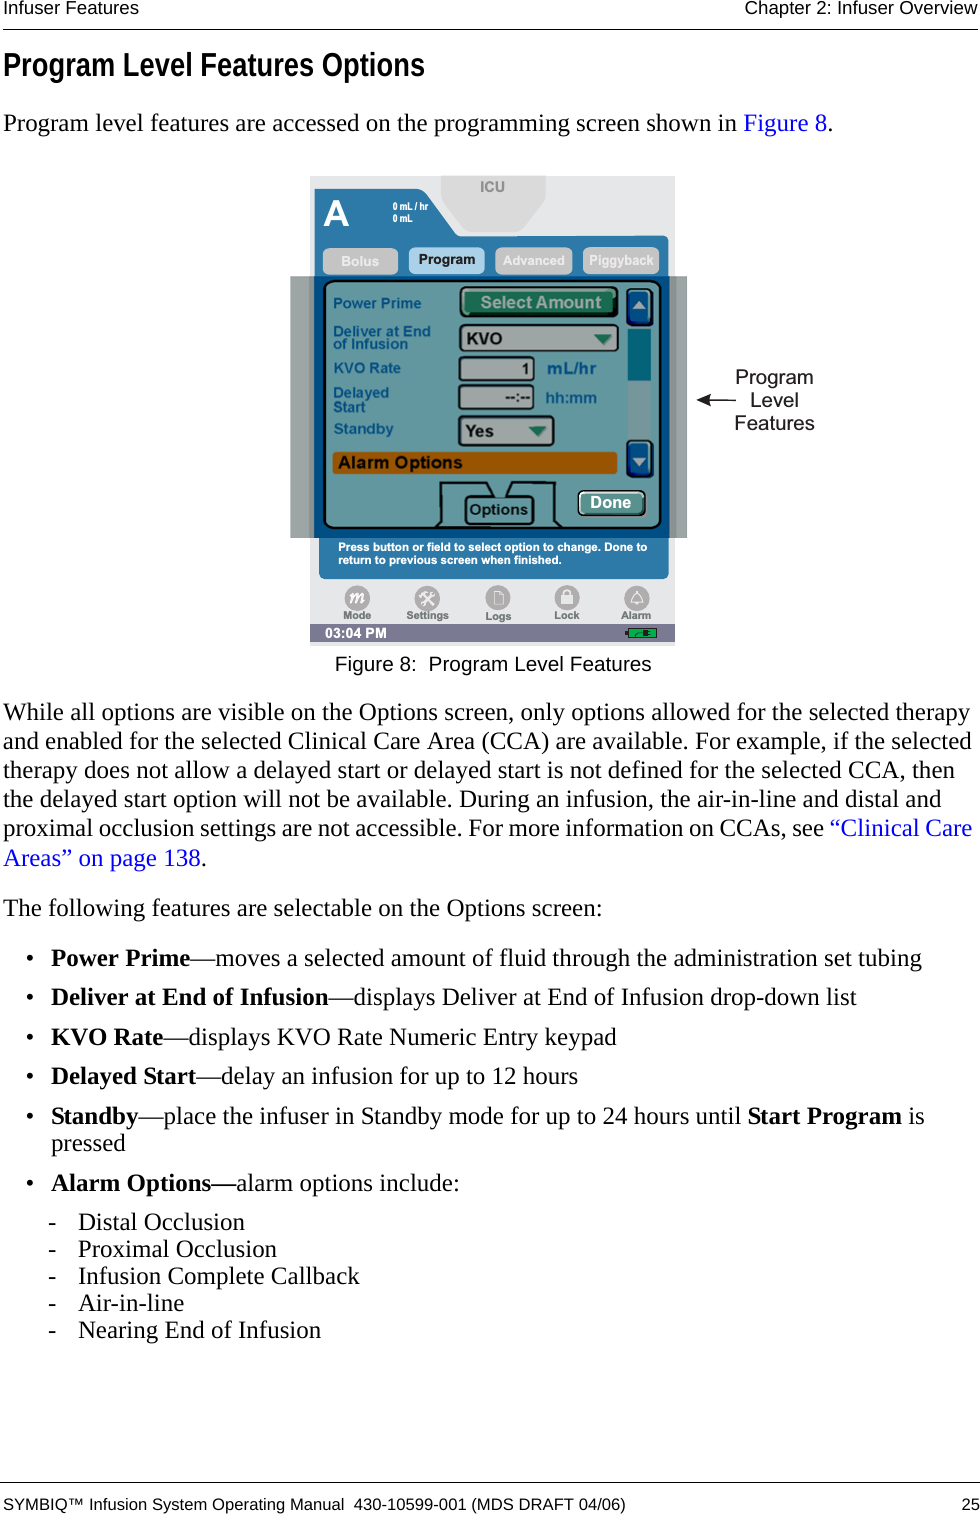 Infuser Features Chapter 2: Infuser Overview SYMBIQ™ Infusion System Operating Manual  430-10599-001 (MDS DRAFT 04/06) 25Program Level Features OptionsProgram level features are accessed on the programming screen shown in Figure 8. Figure 8:  Program Level FeaturesWhile all options are visible on the Options screen, only options allowed for the selected therapy and enabled for the selected Clinical Care Area (CCA) are available. For example, if the selected therapy does not allow a delayed start or delayed start is not defined for the selected CCA, then the delayed start option will not be available. During an infusion, the air-in-line and distal and proximal occlusion settings are not accessible. For more information on CCAs, see “Clinical Care Areas” on page 138.The following features are selectable on the Options screen:•Power Prime—moves a selected amount of fluid through the administration set tubing•Deliver at End of Infusion—displays Deliver at End of Infusion drop-down list•KVO Rate—displays KVO Rate Numeric Entry keypad•Delayed Start—delay an infusion for up to 12 hours•Standby—place the infuser in Standby mode for up to 24 hours until Start Program is pressed•Alarm Options—alarm options include:- Distal Occlusion- Proximal Occlusion- Infusion Complete Callback- Air-in-line- Nearing End of InfusionProgramLevelFeaturesAPiggybackKVO RateDelayedStartDeliver at Endof InfusionPower Prime1--:--Standbyhh:mmmL/hrAdvancedYesKVOAlarm OptionsOptionsProgram03:04 PMSelect AmountBolusPress button or field to select option to change. Done toreturn to previous screen when finished.ICUDone0mL/hr0mLLogsSettings LockModeAlarm